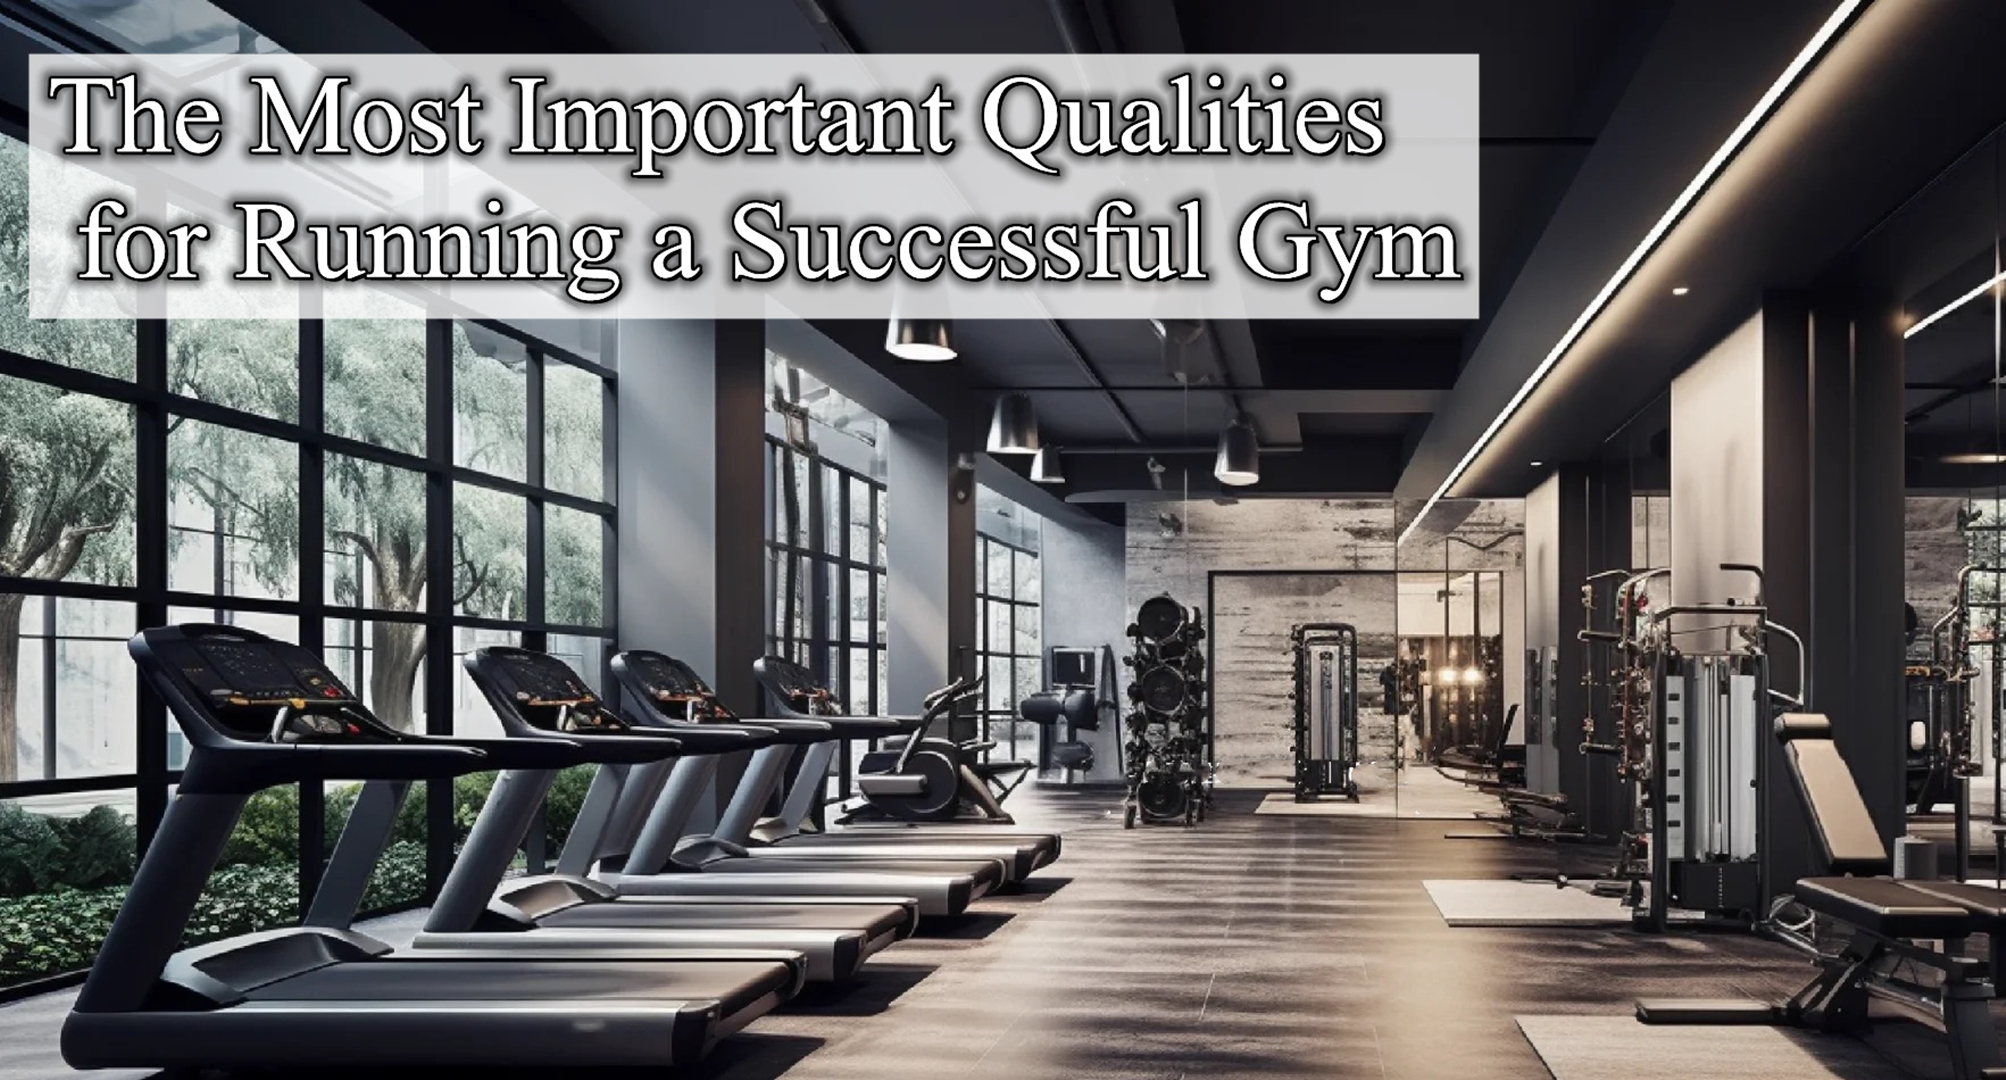 The Most Important Qualities for Running a Successful Gym